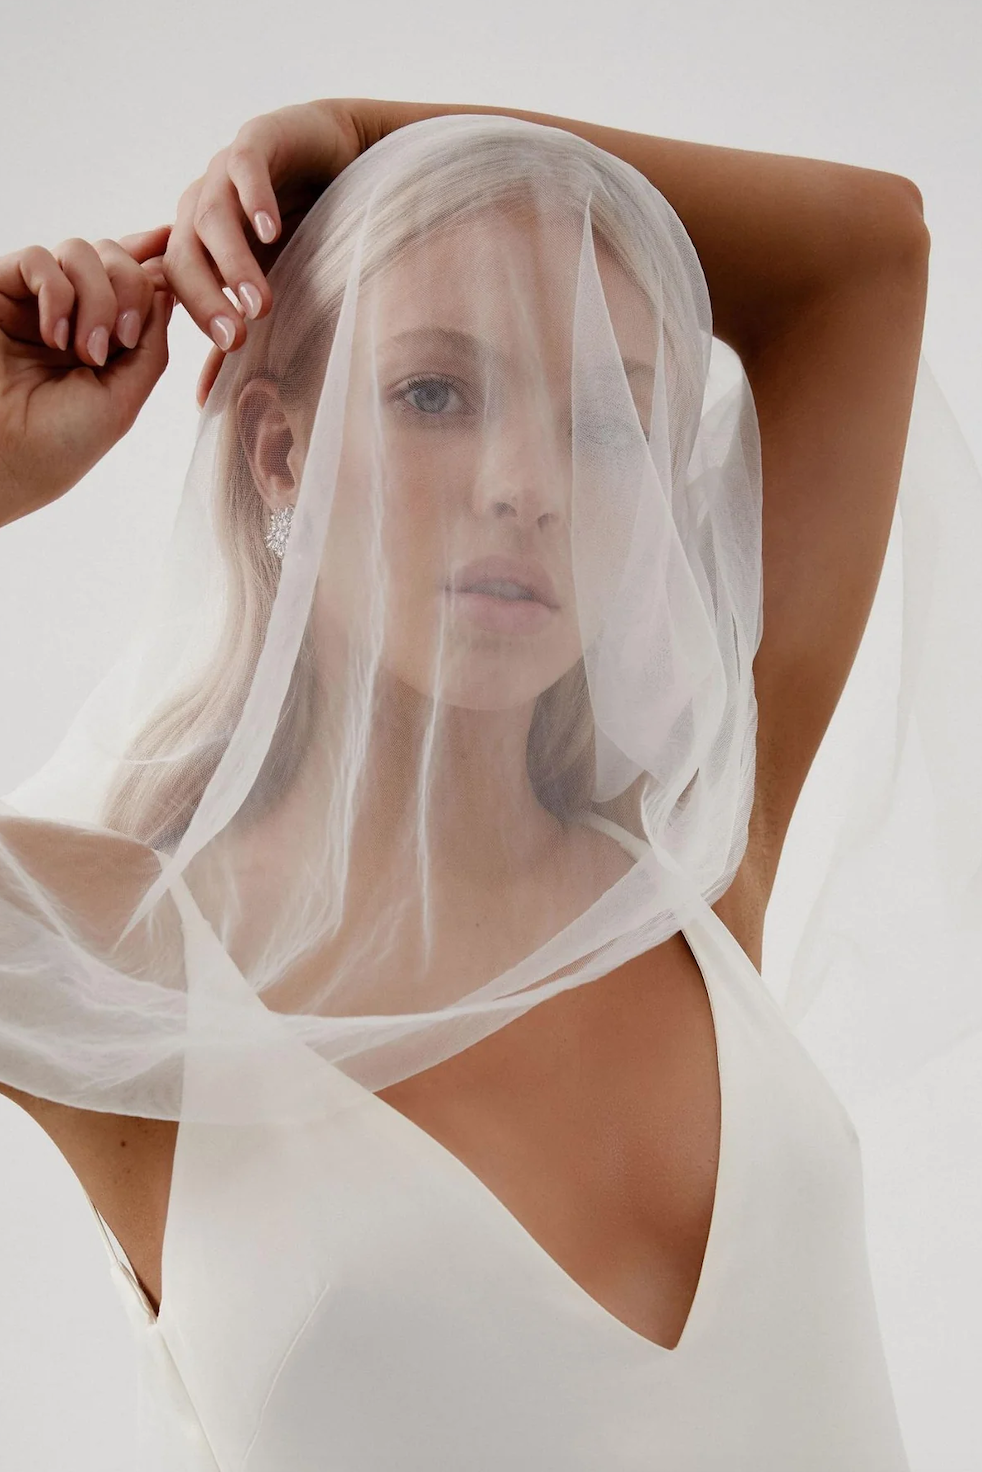 Veils: Choosing The Perfect One For Your Wedding Day